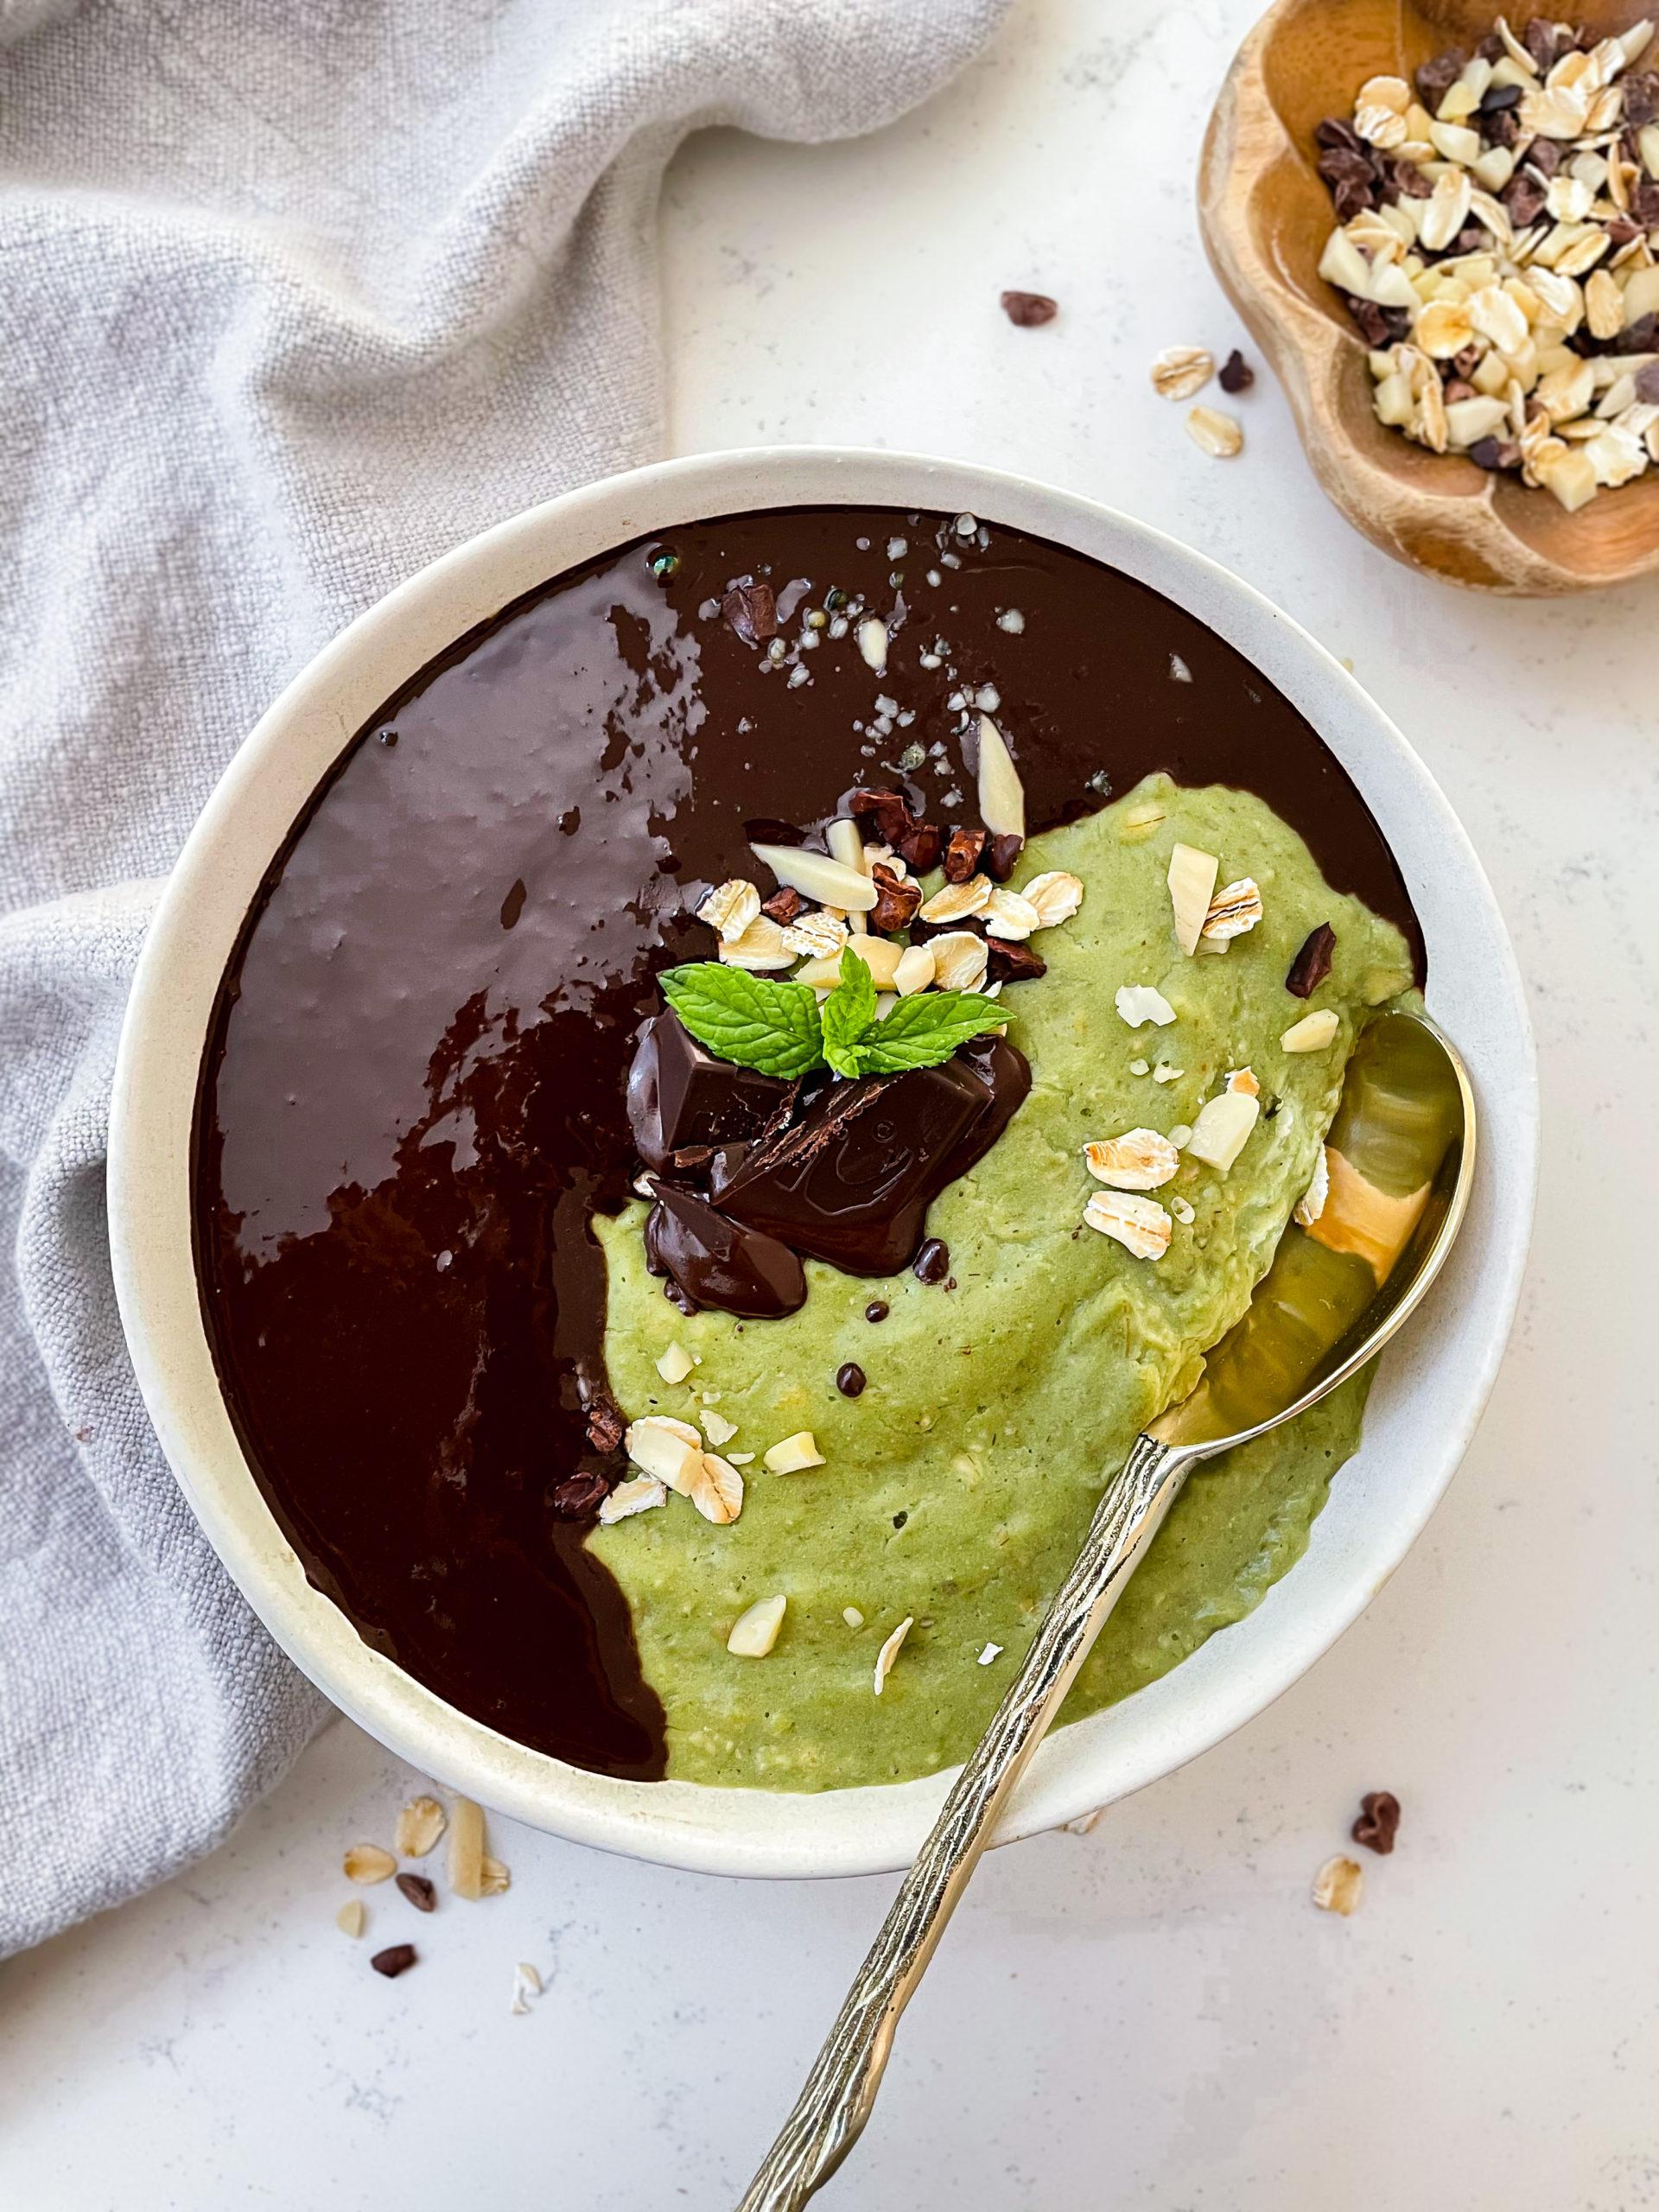 mint oatmeal topped with chocolate and chocolate ganache